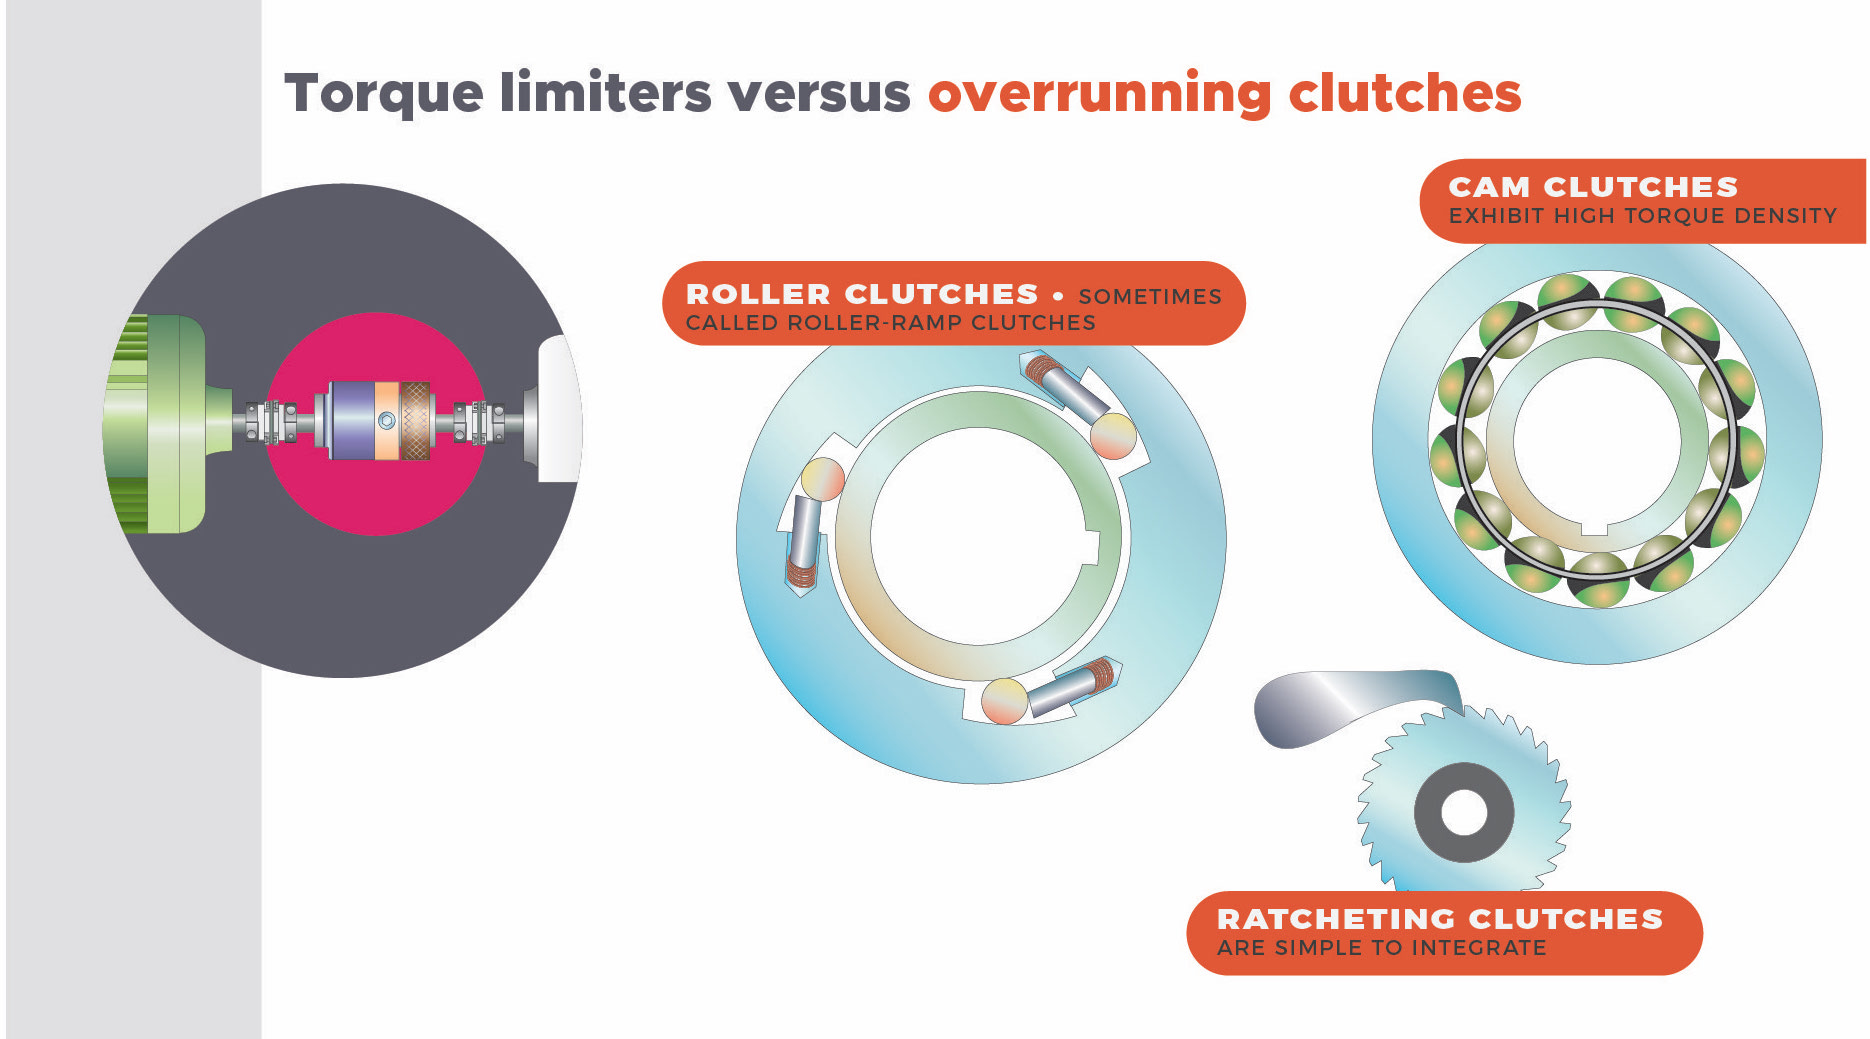 what is a torque limiter versus mechanical overrunning clutches